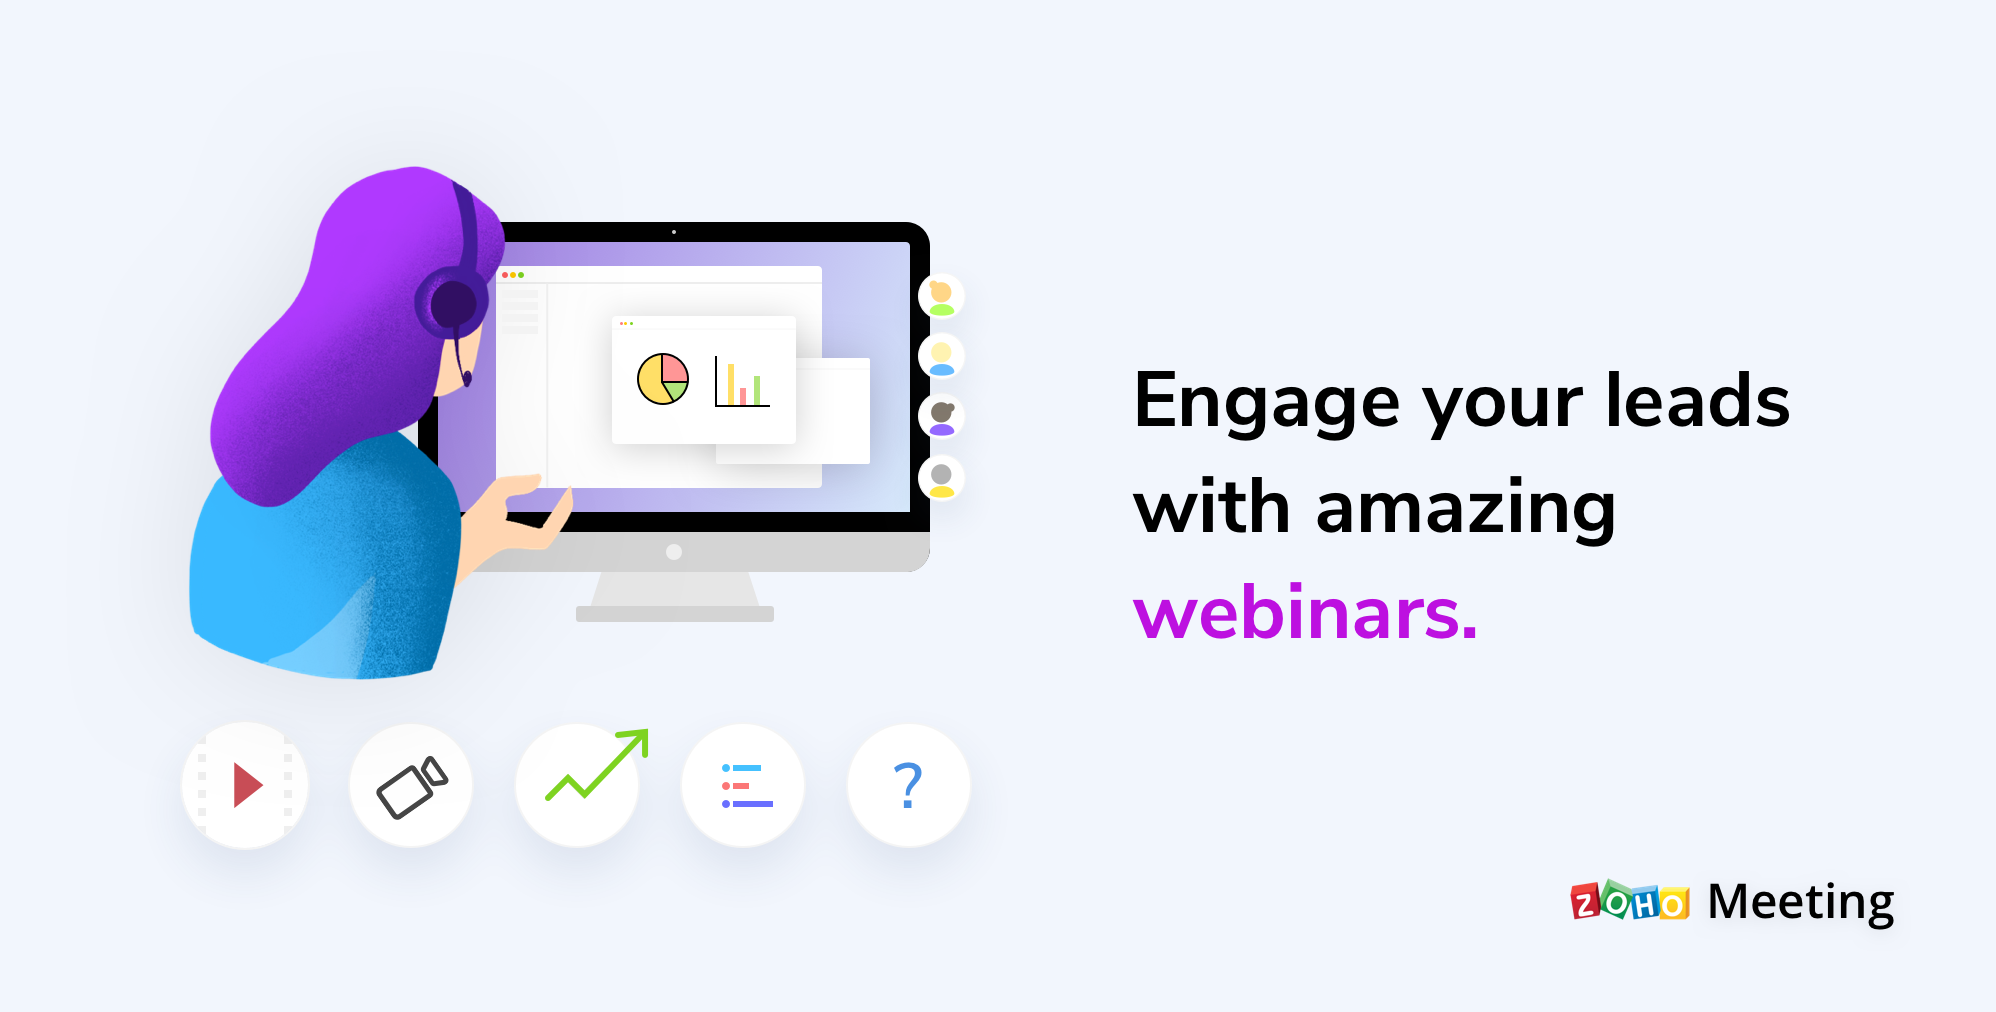 Engage your leads with amazing webinars.